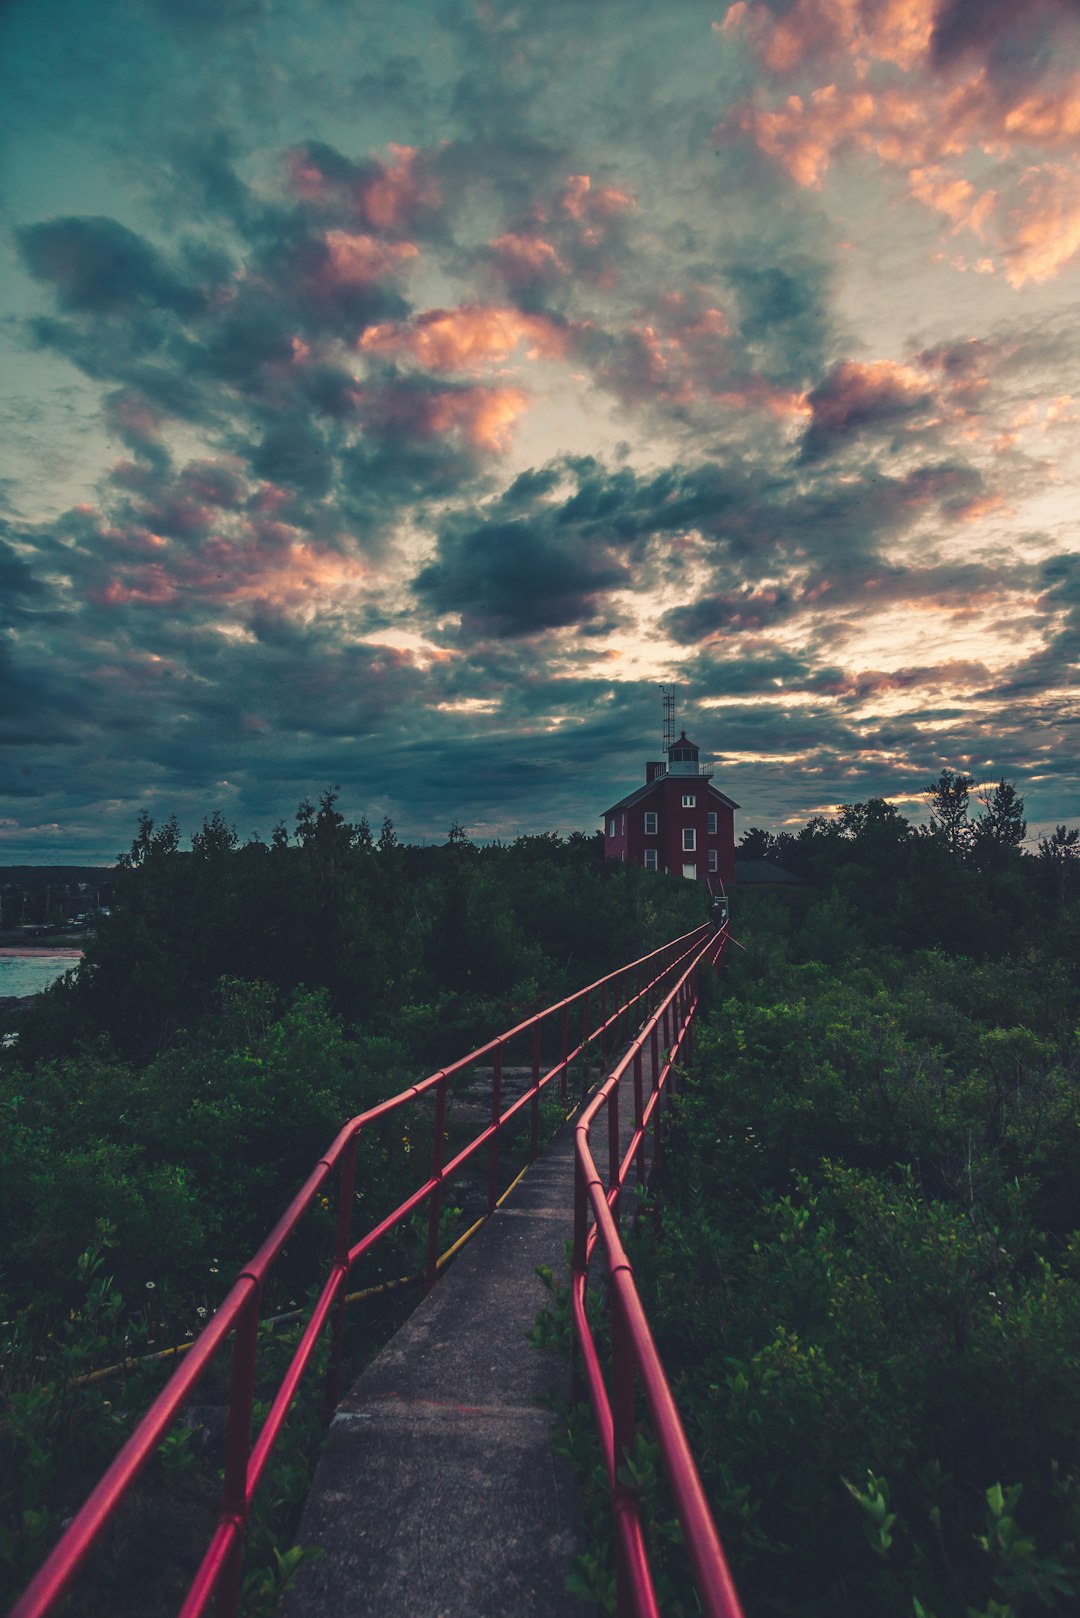 red metal ladder near green trees under cloudy sky during daytime